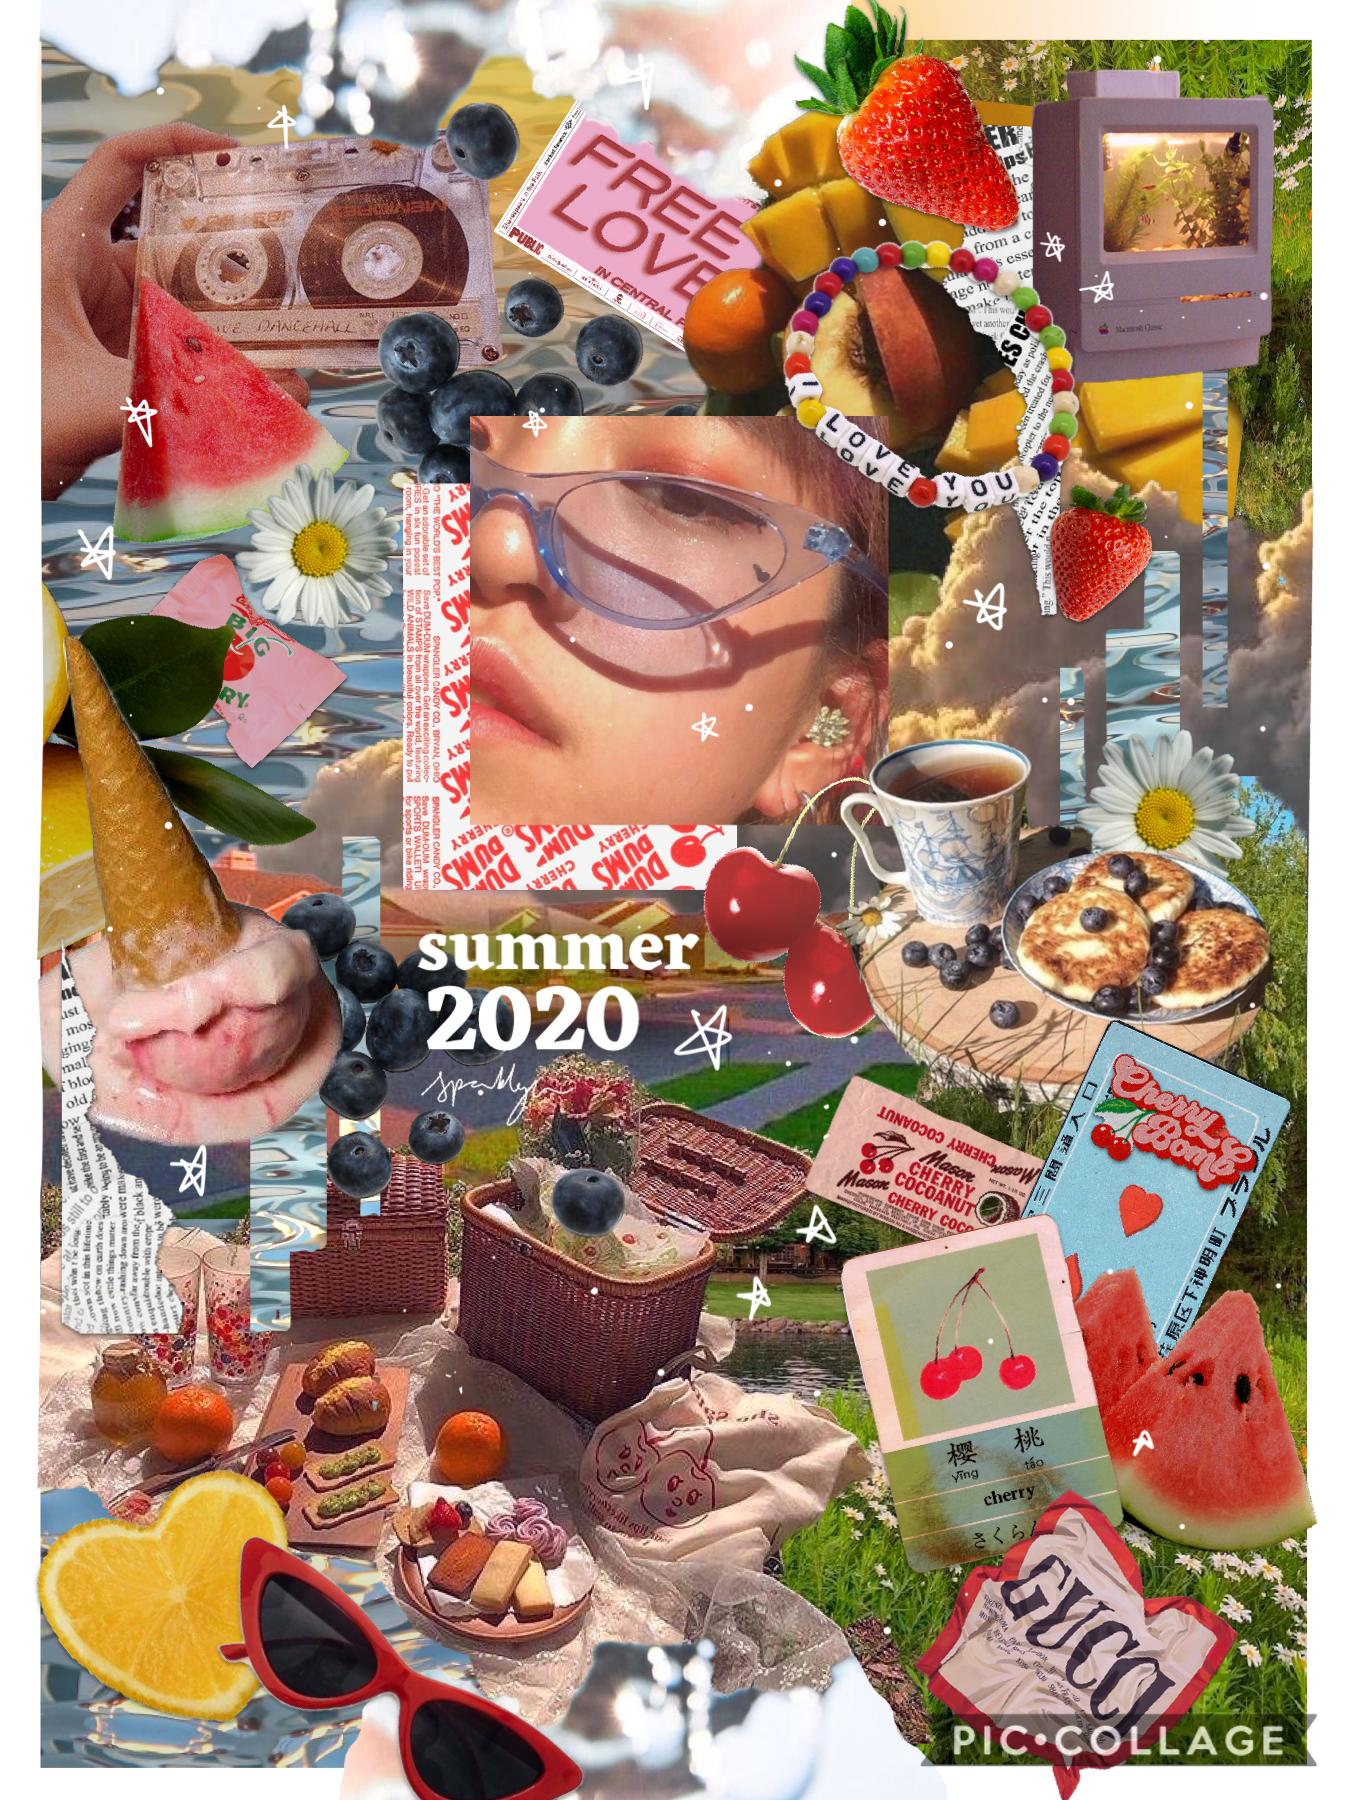 I made this for all the summer contests that I just now realized all ended 🙂. Lol this collage is a lot brighter in color than my past collages. Hah hopefully it doesn’t stick out like a sore thumb